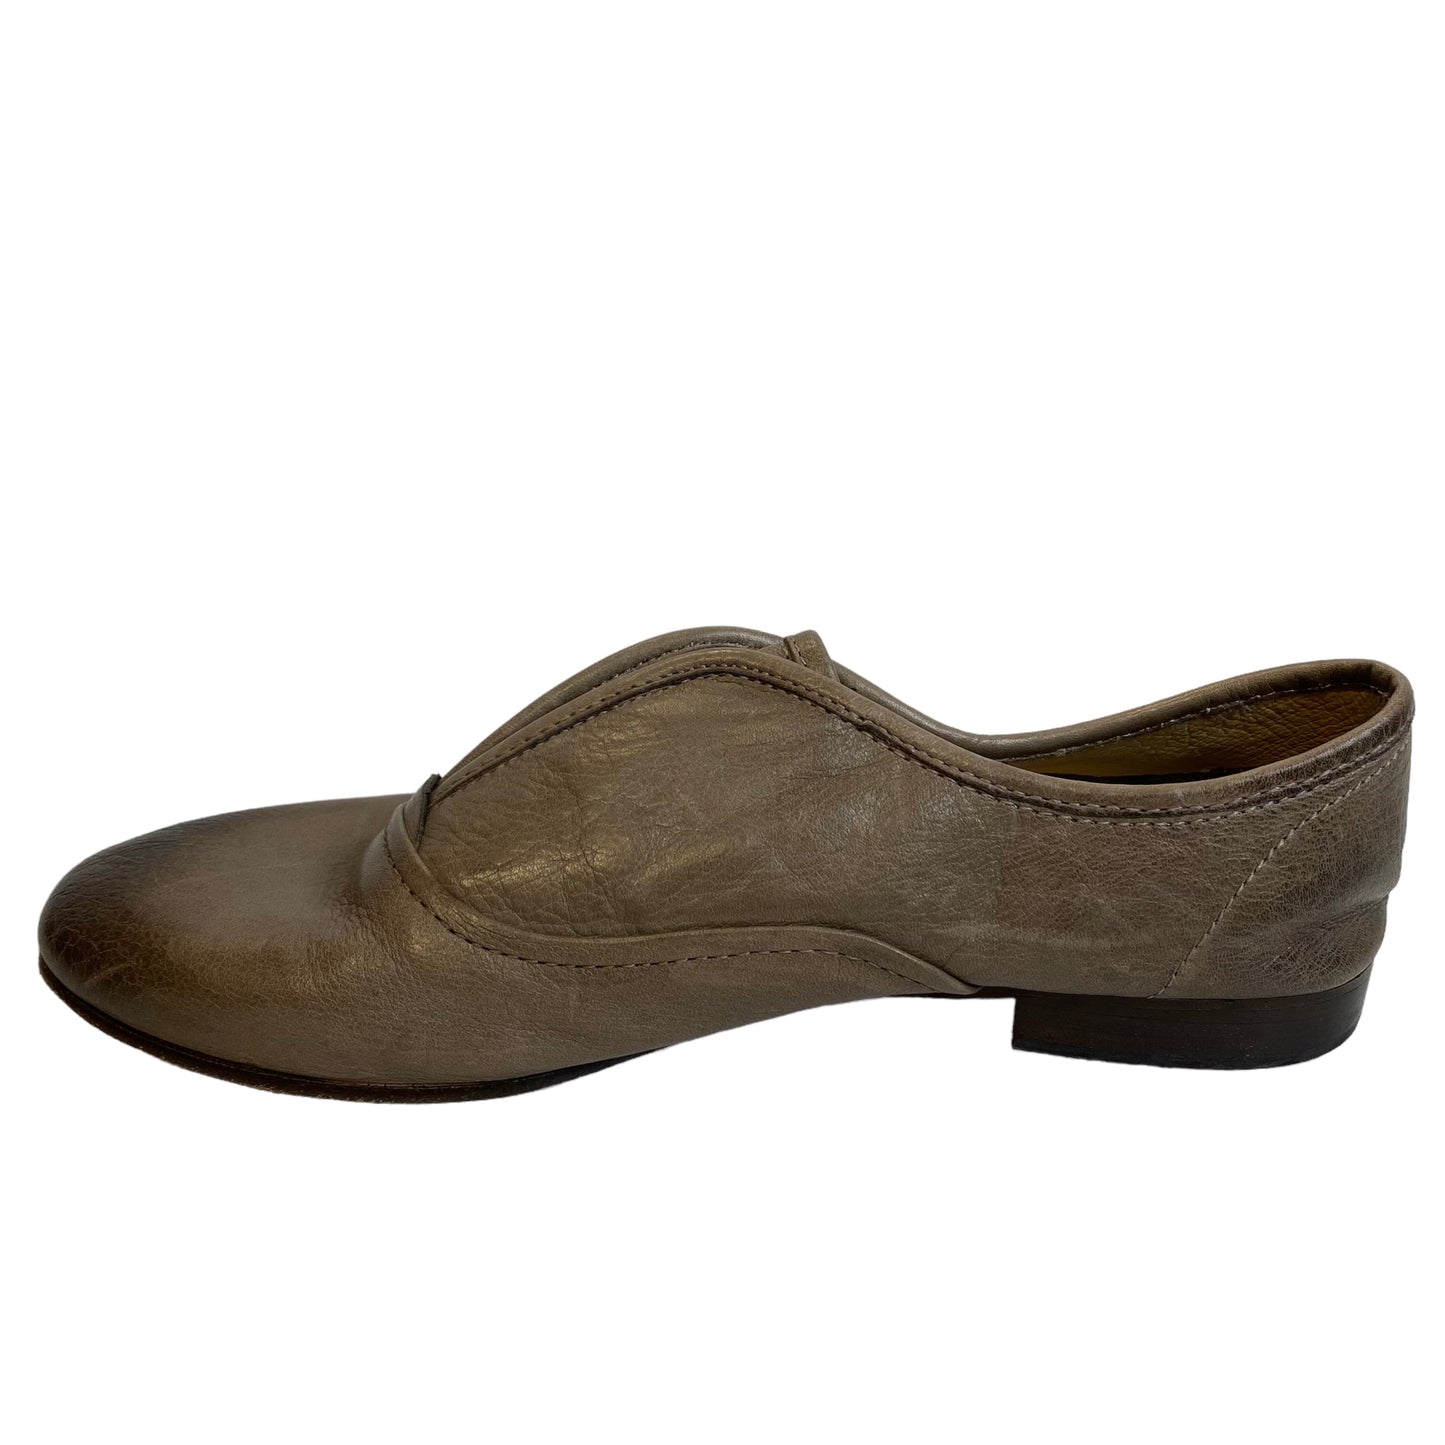 Shoes Flats Other By Frye  Size: 10